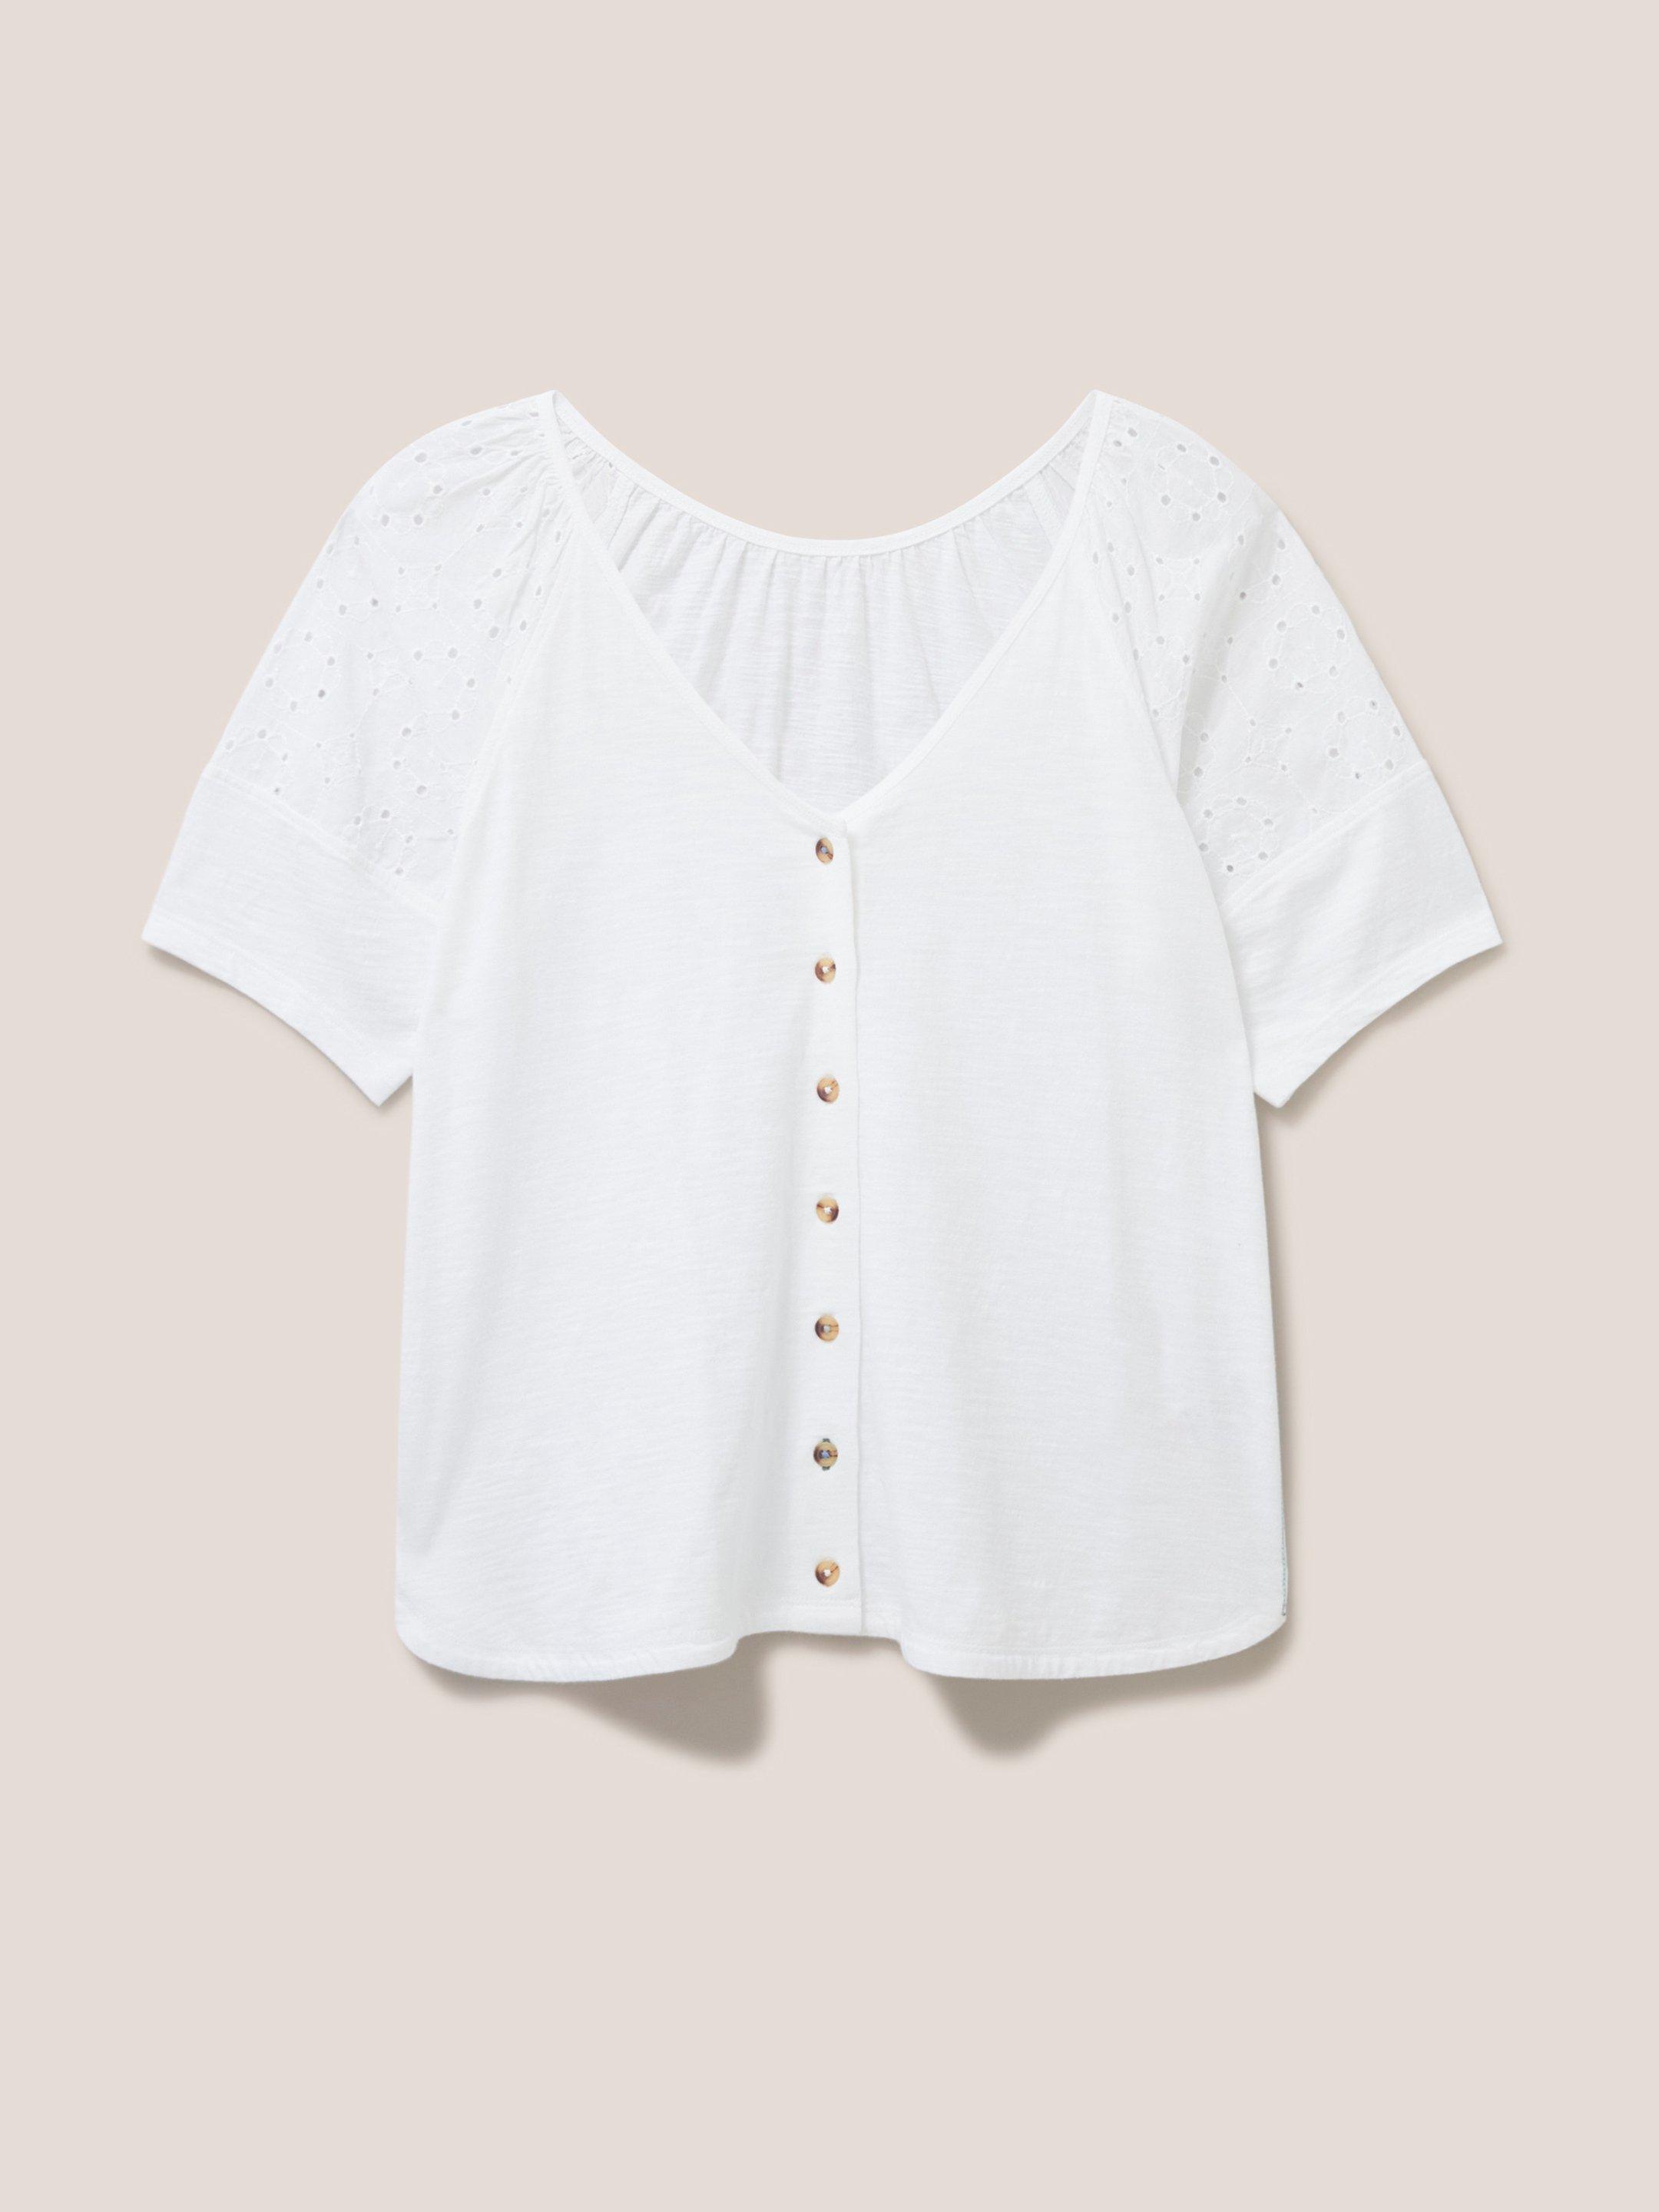 BRODERIE MIX TWO WAY TOP in BRIL WHITE - FLAT FRONT